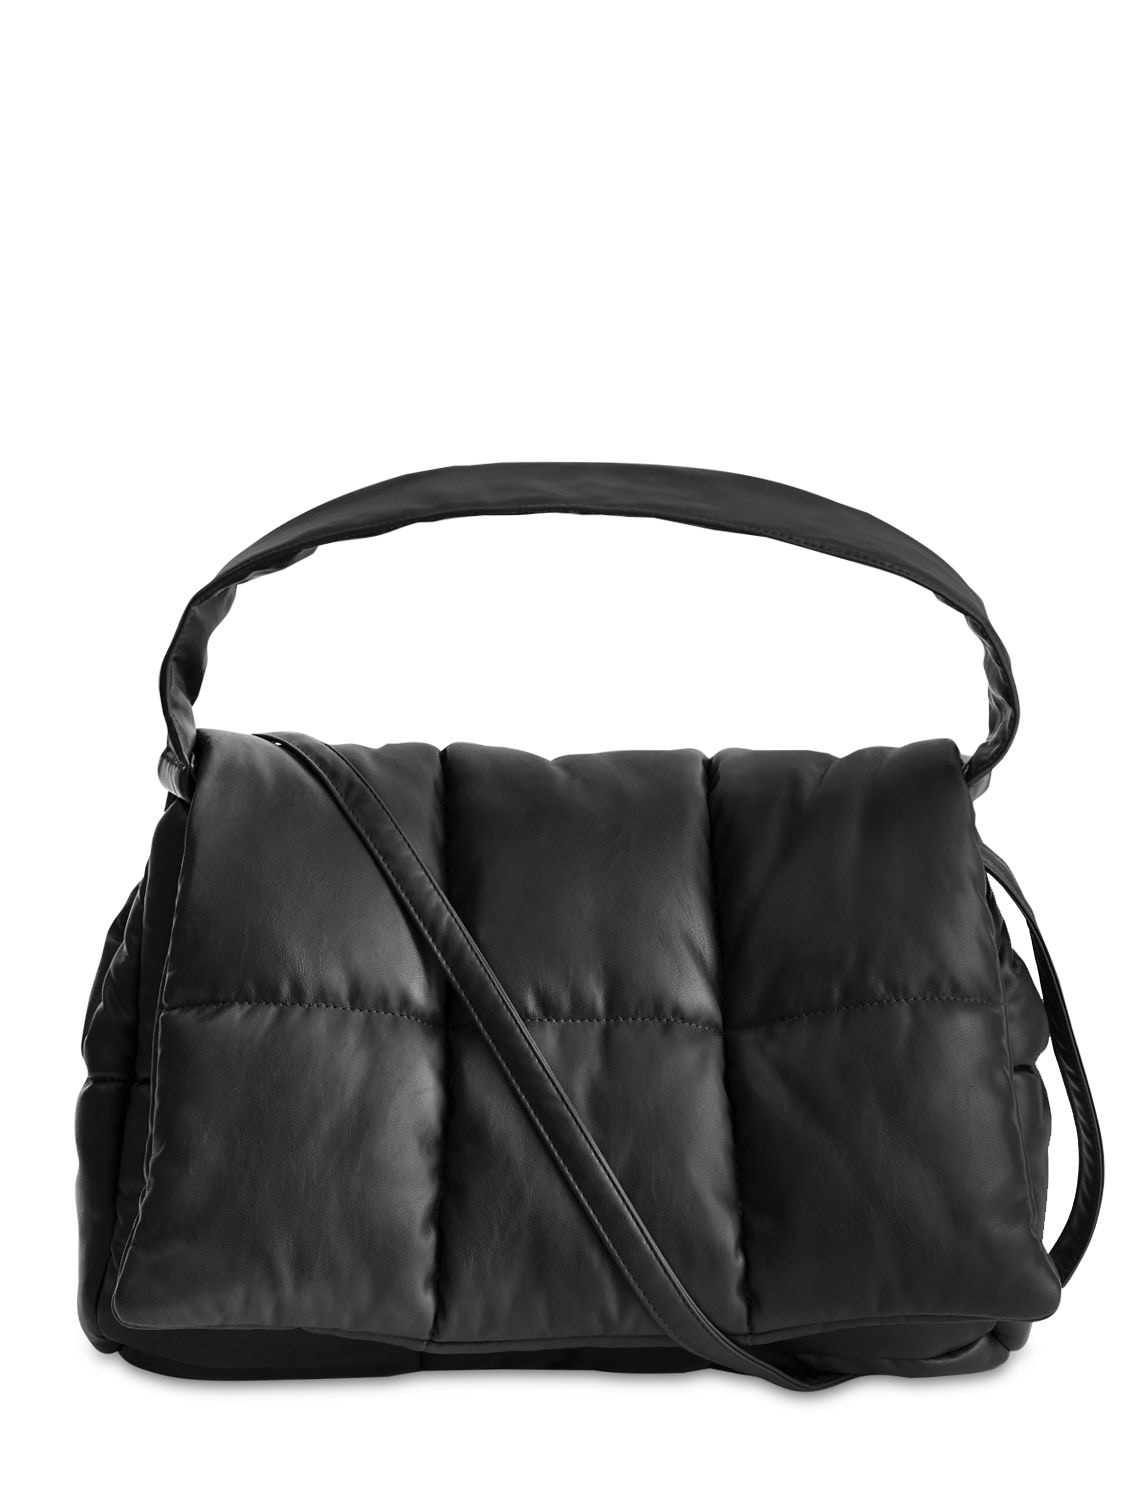 Stand Studio Wanda Quilted Faux Leather Bag In Black | ModeSens